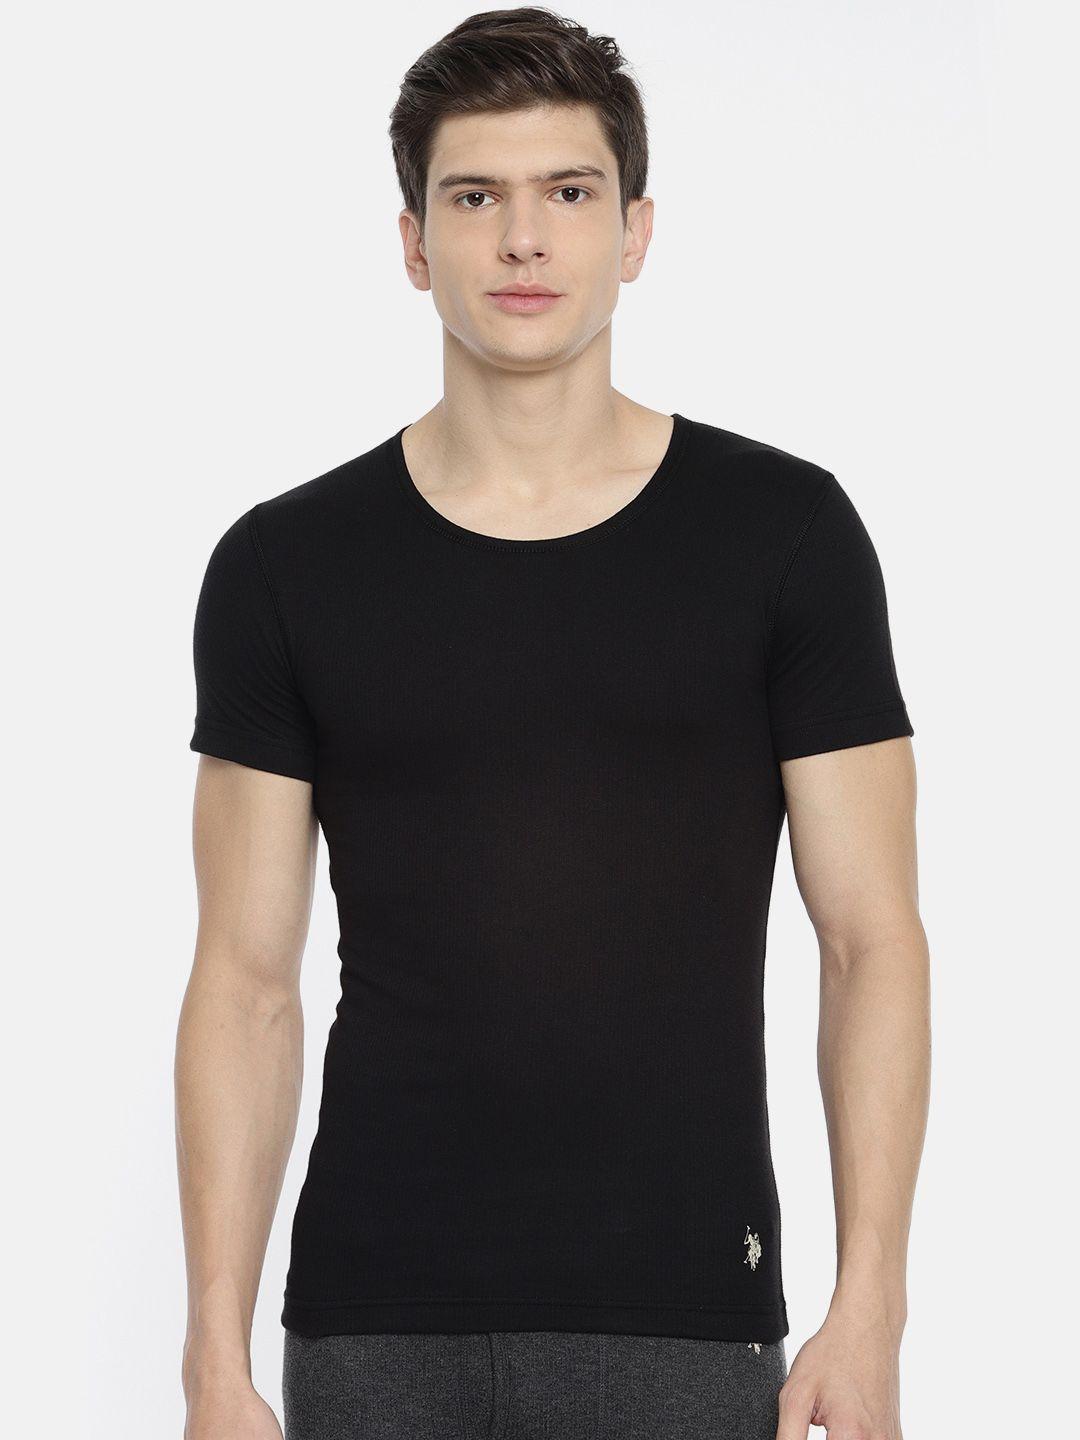 u.s.-polo-assn.-men-black-solid-round-neck-knitted-thermal-t-shirt-i651-002-pl-l